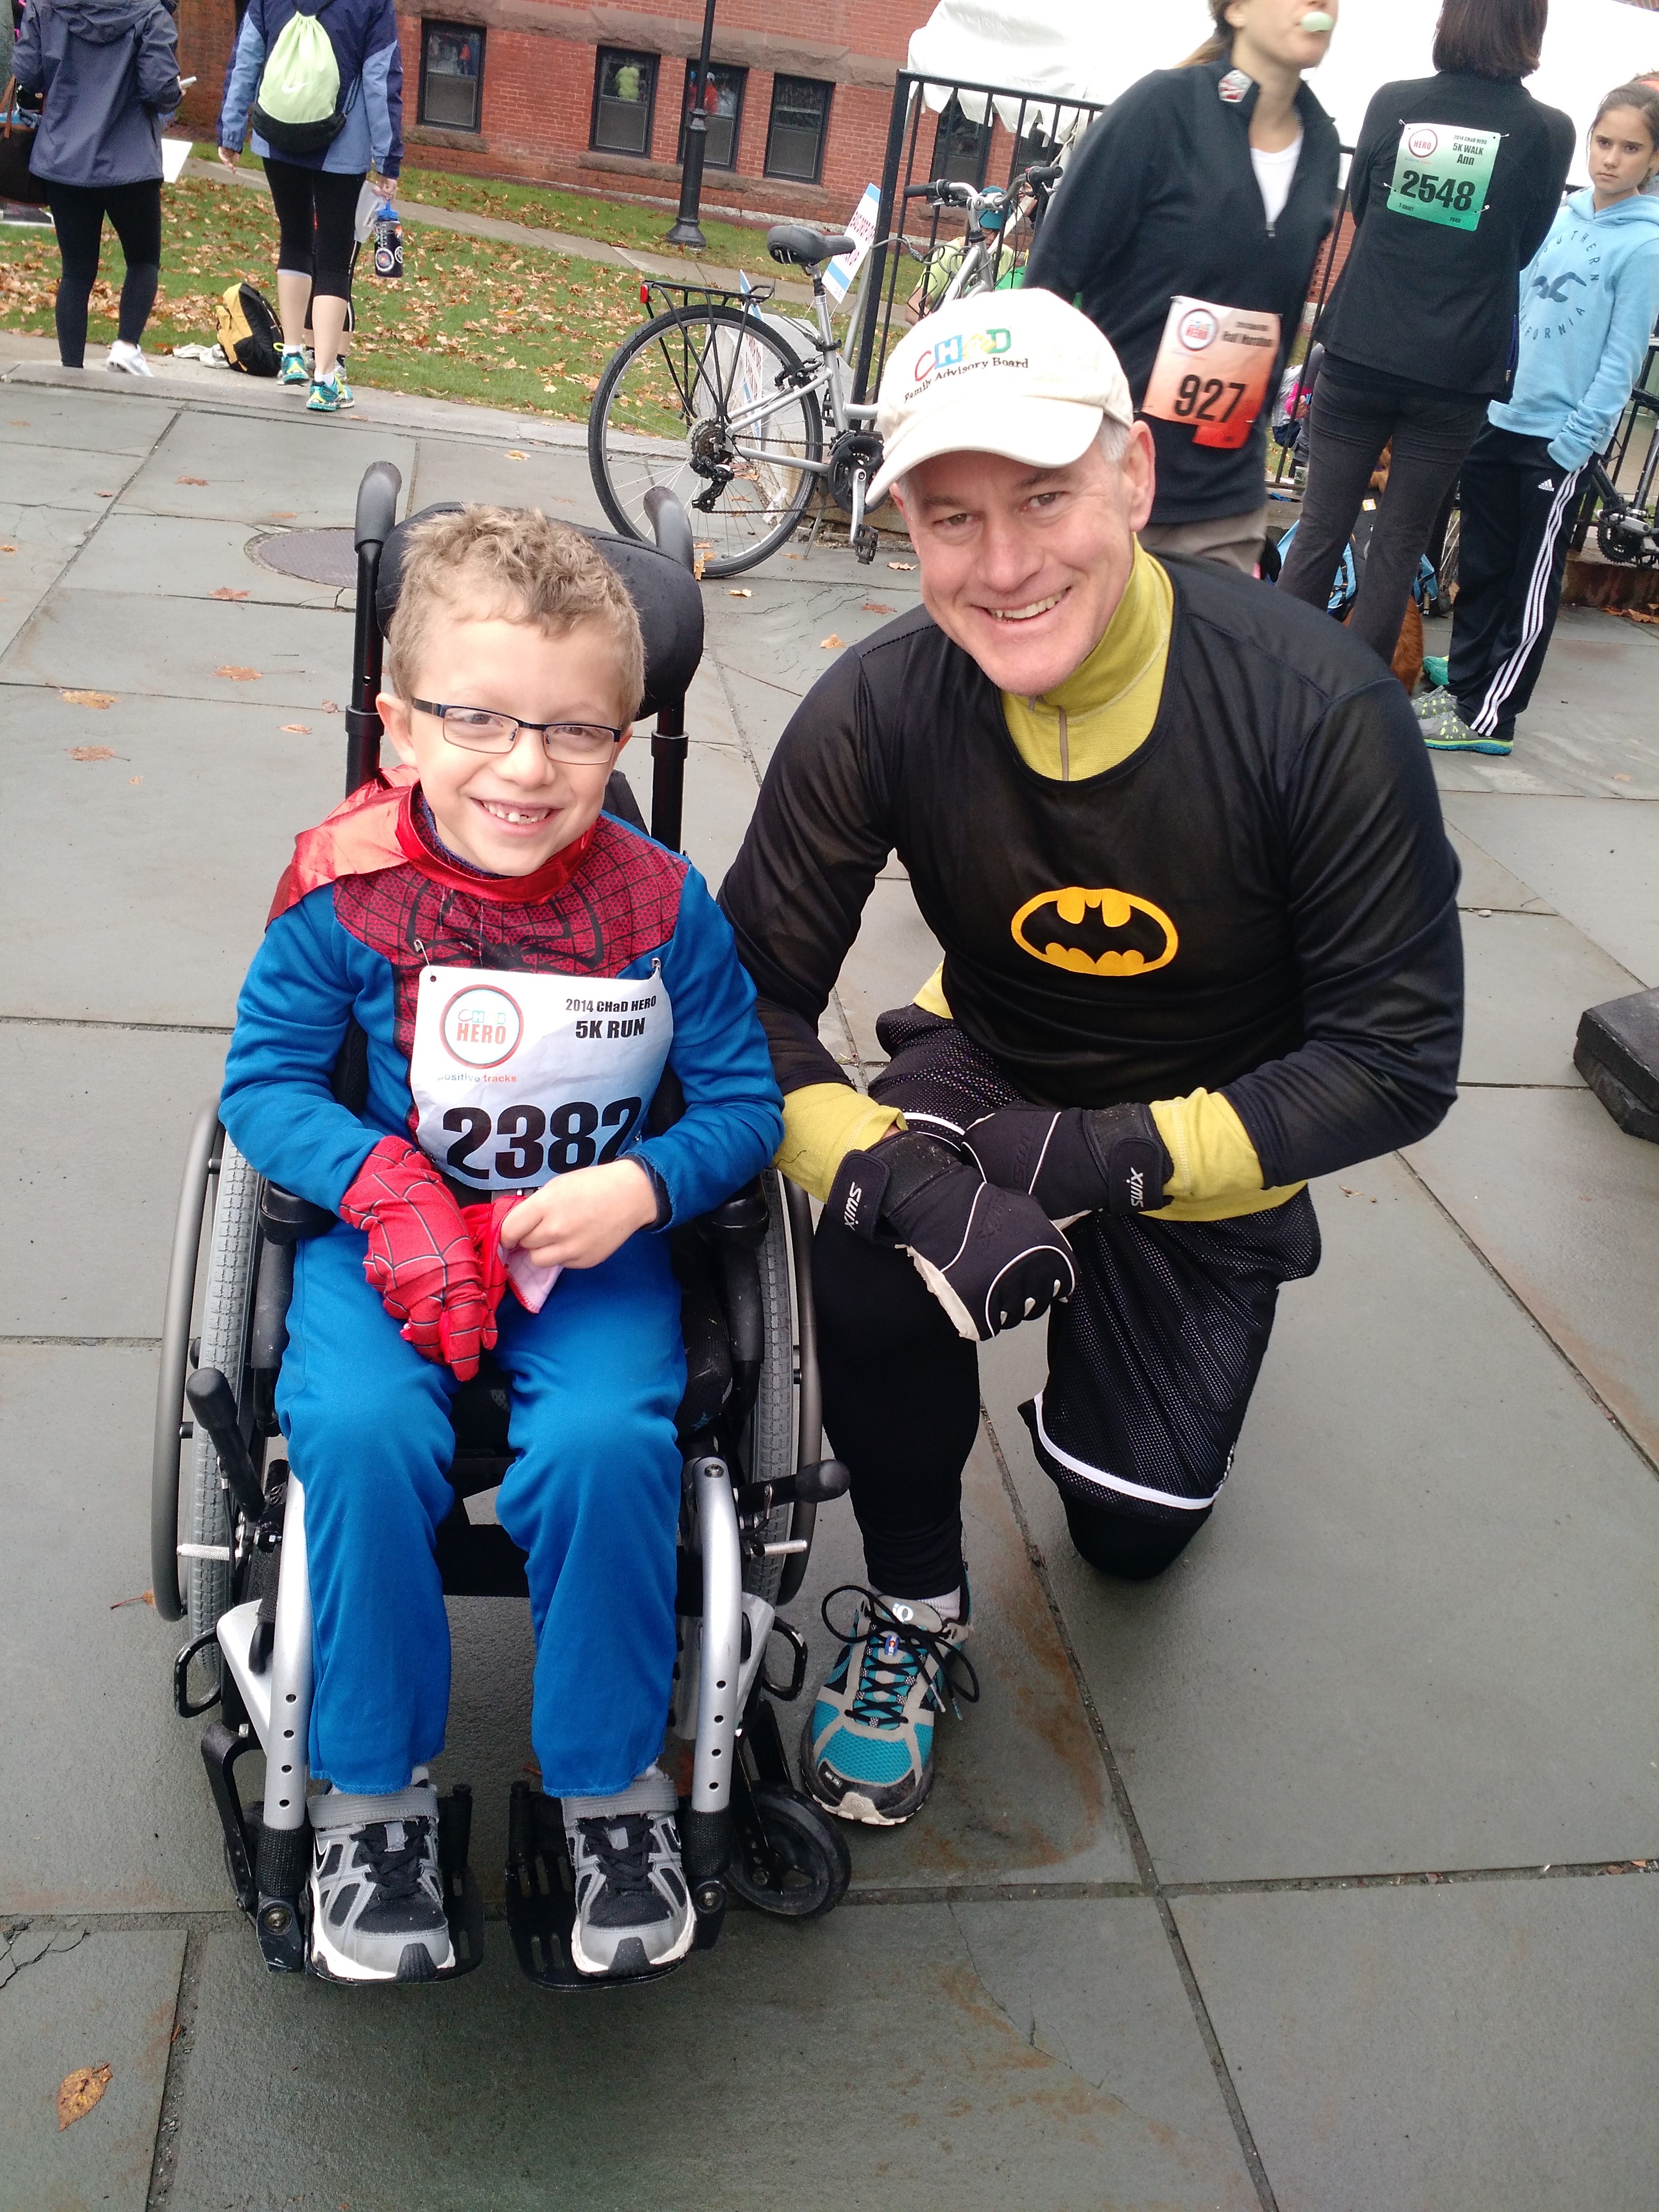 Griffin LaFountain and CHaD pediatrician Steven Chapman, MD, participated in the 2014 CHaD HERO 5K together.